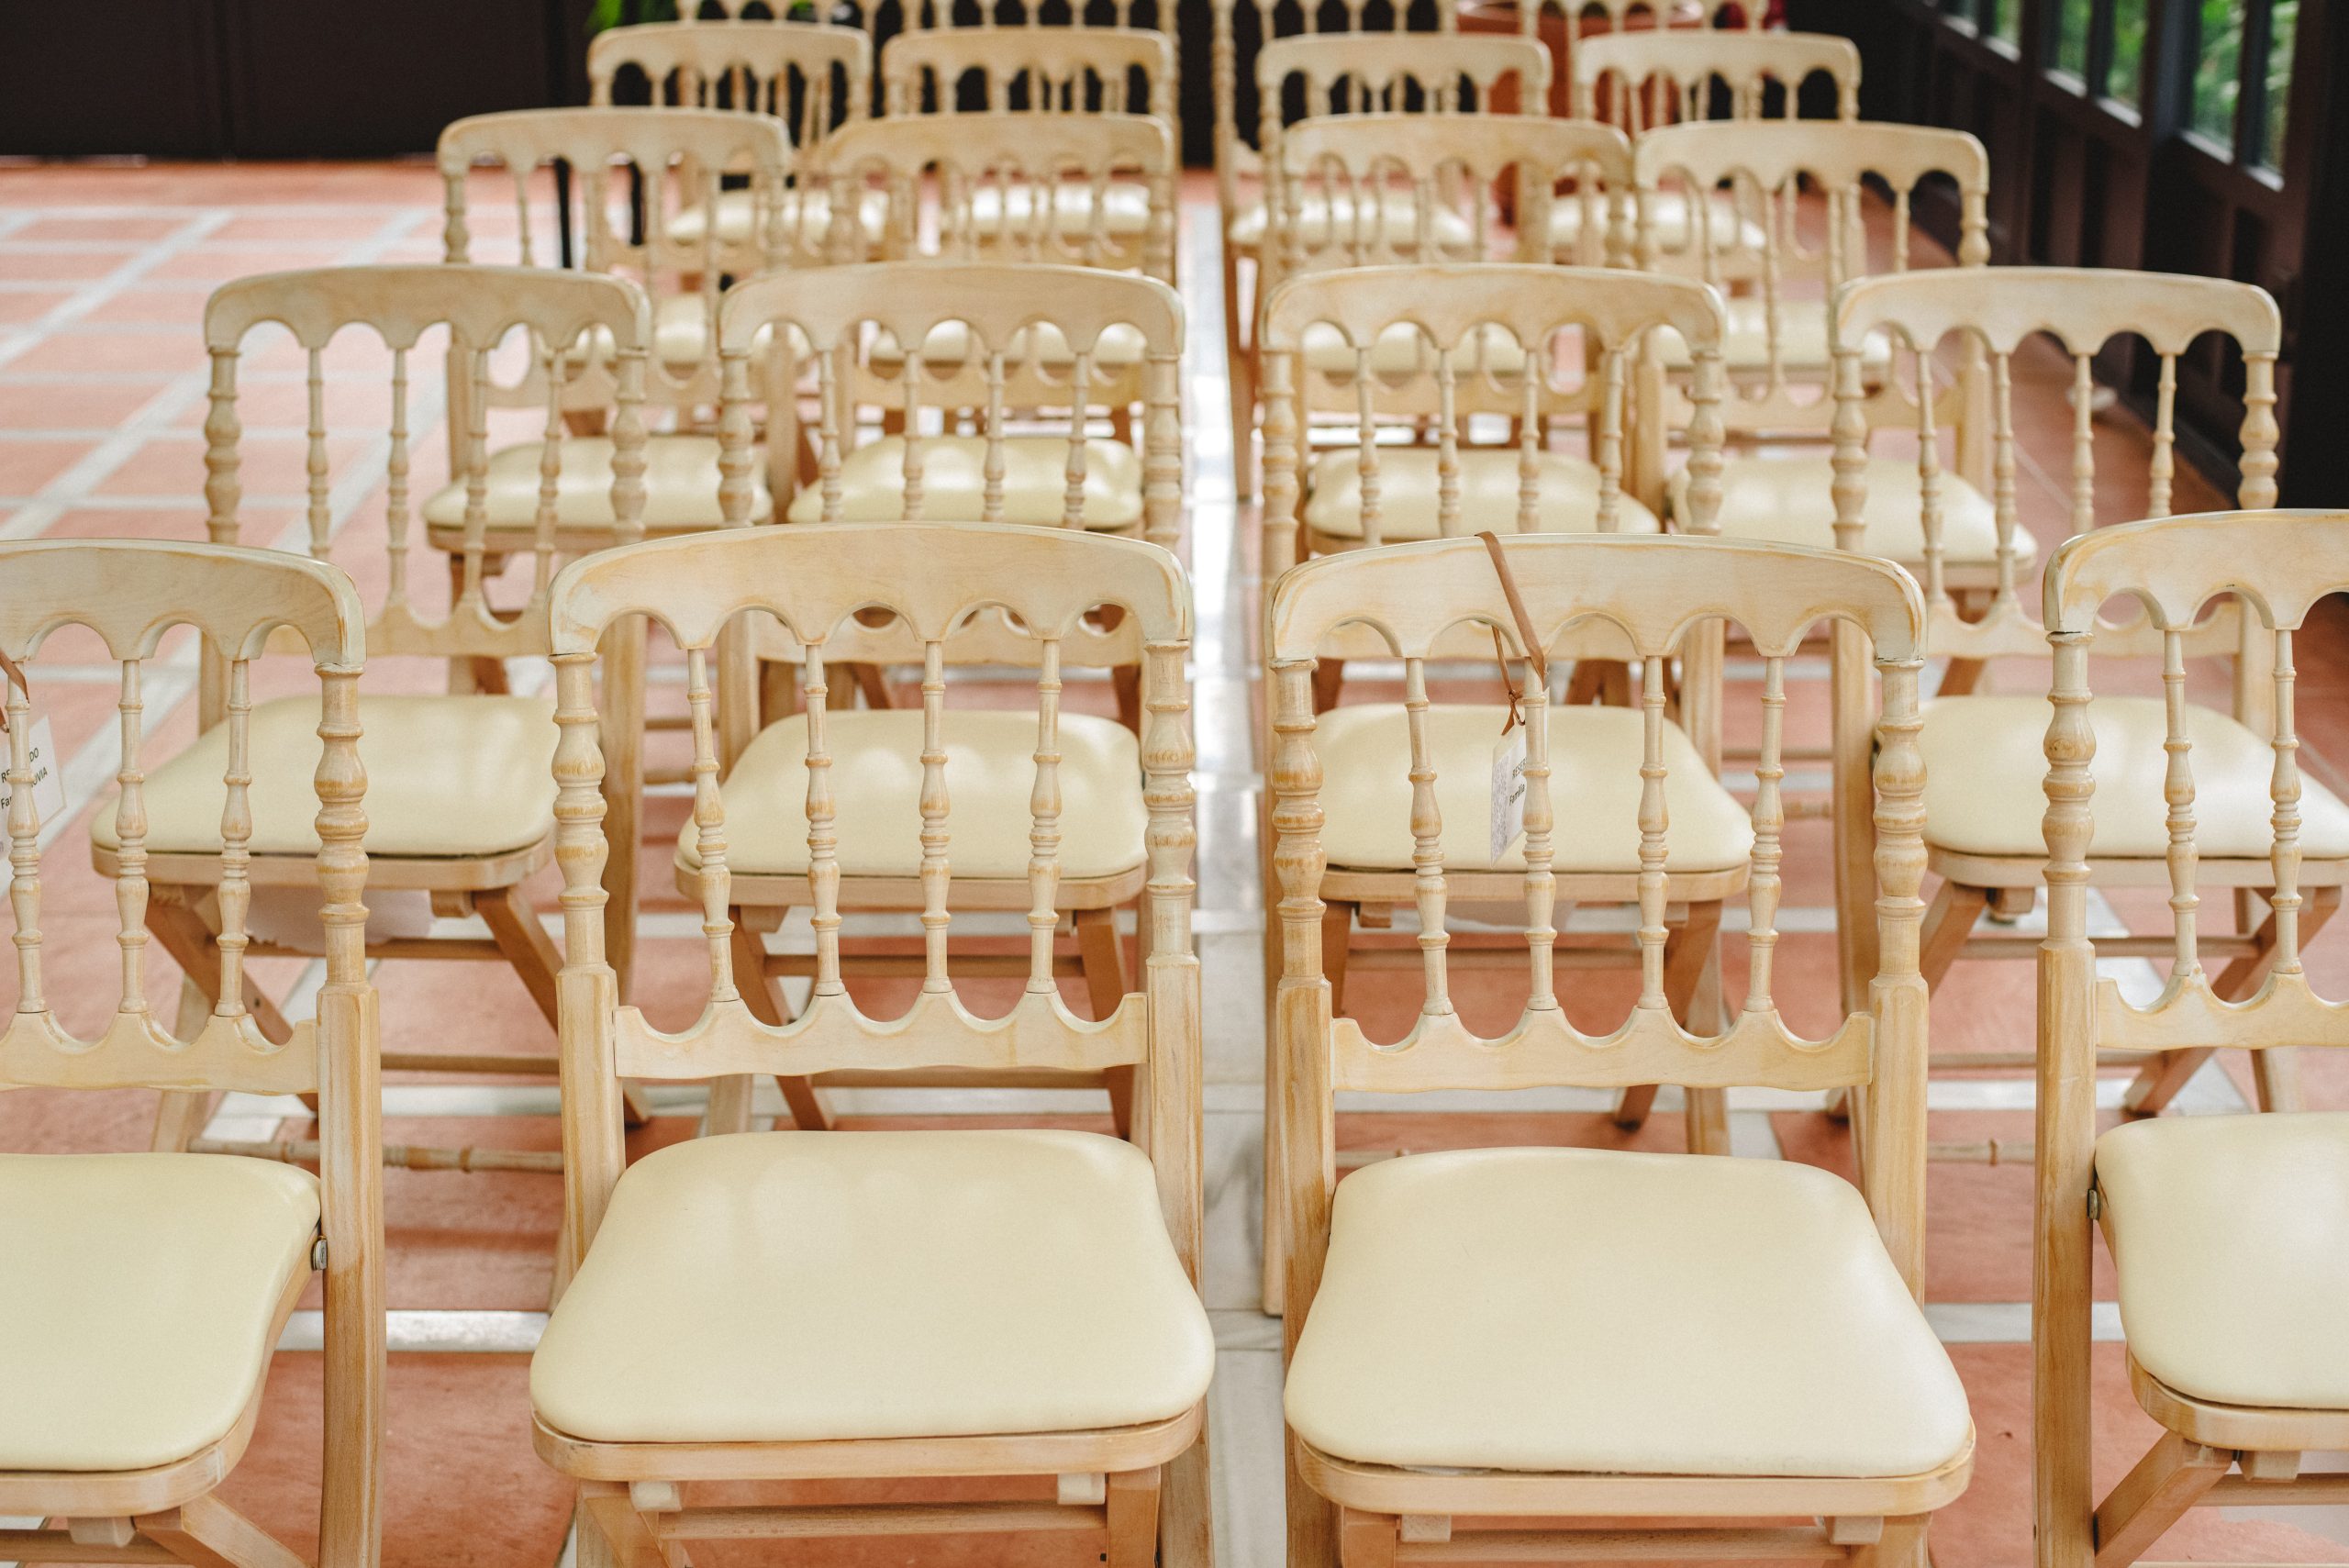 Many empty white wooden chairs lined up for a retro style event.